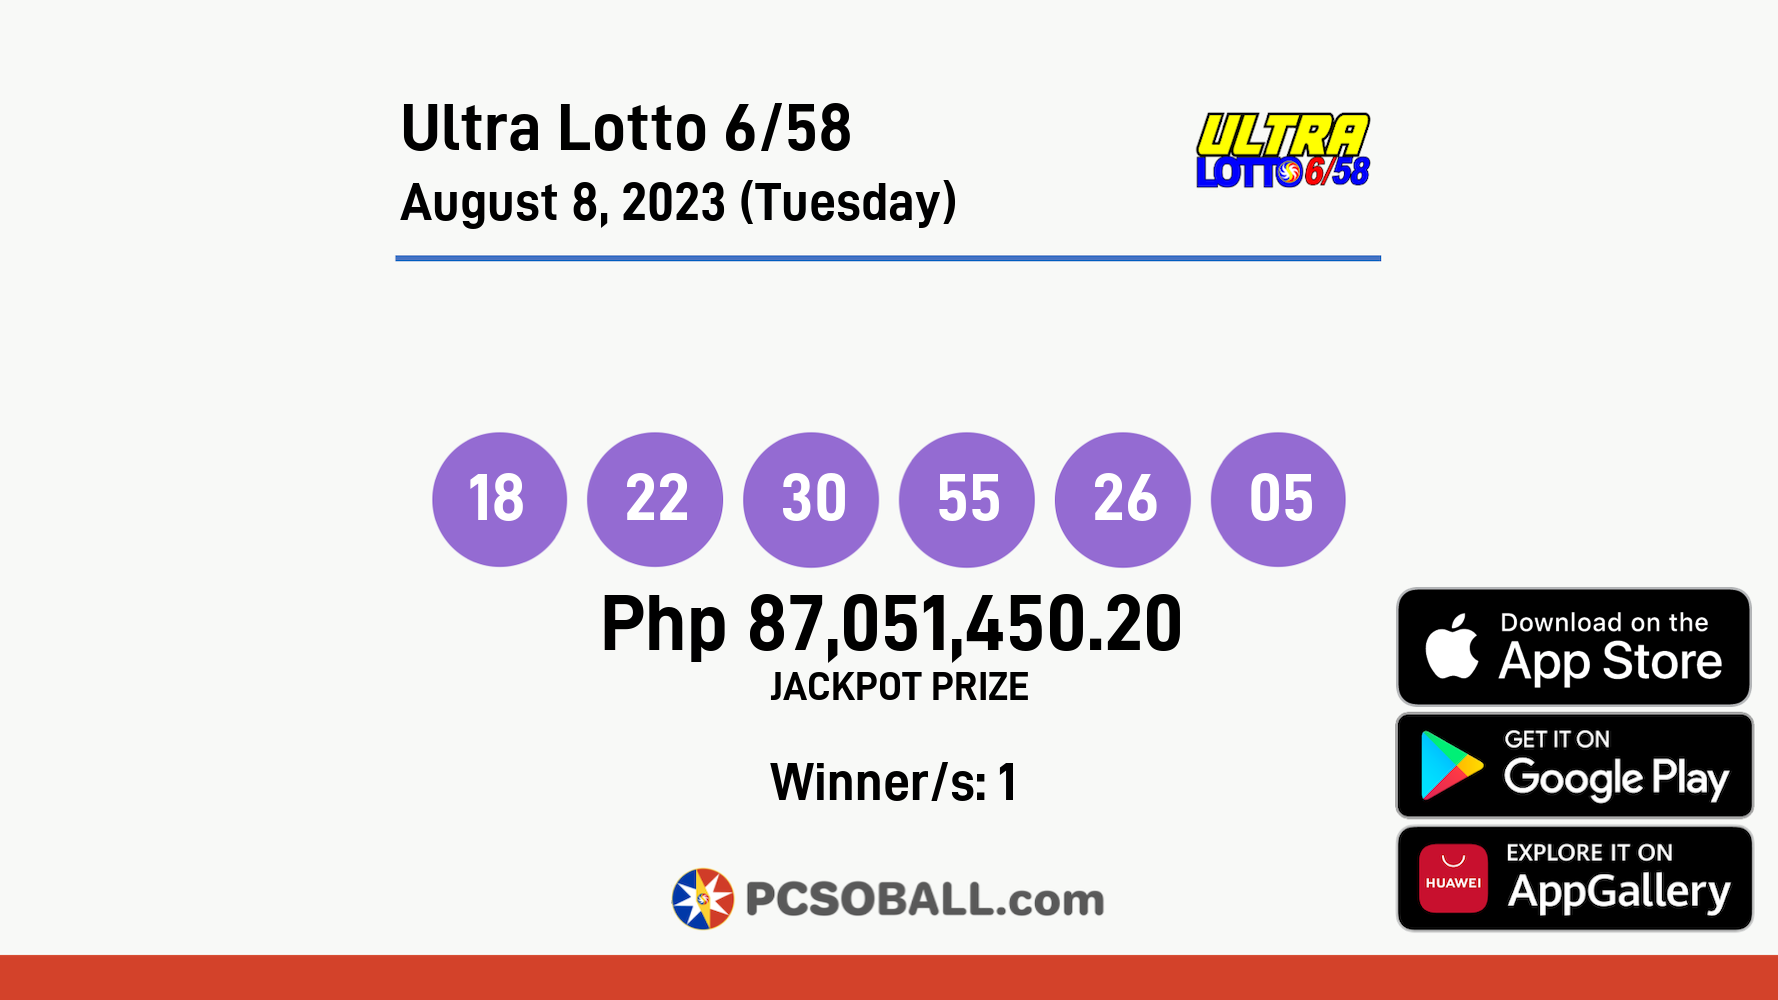 Ultra Lotto 6/58 August 8, 2023 (Tuesday) Result